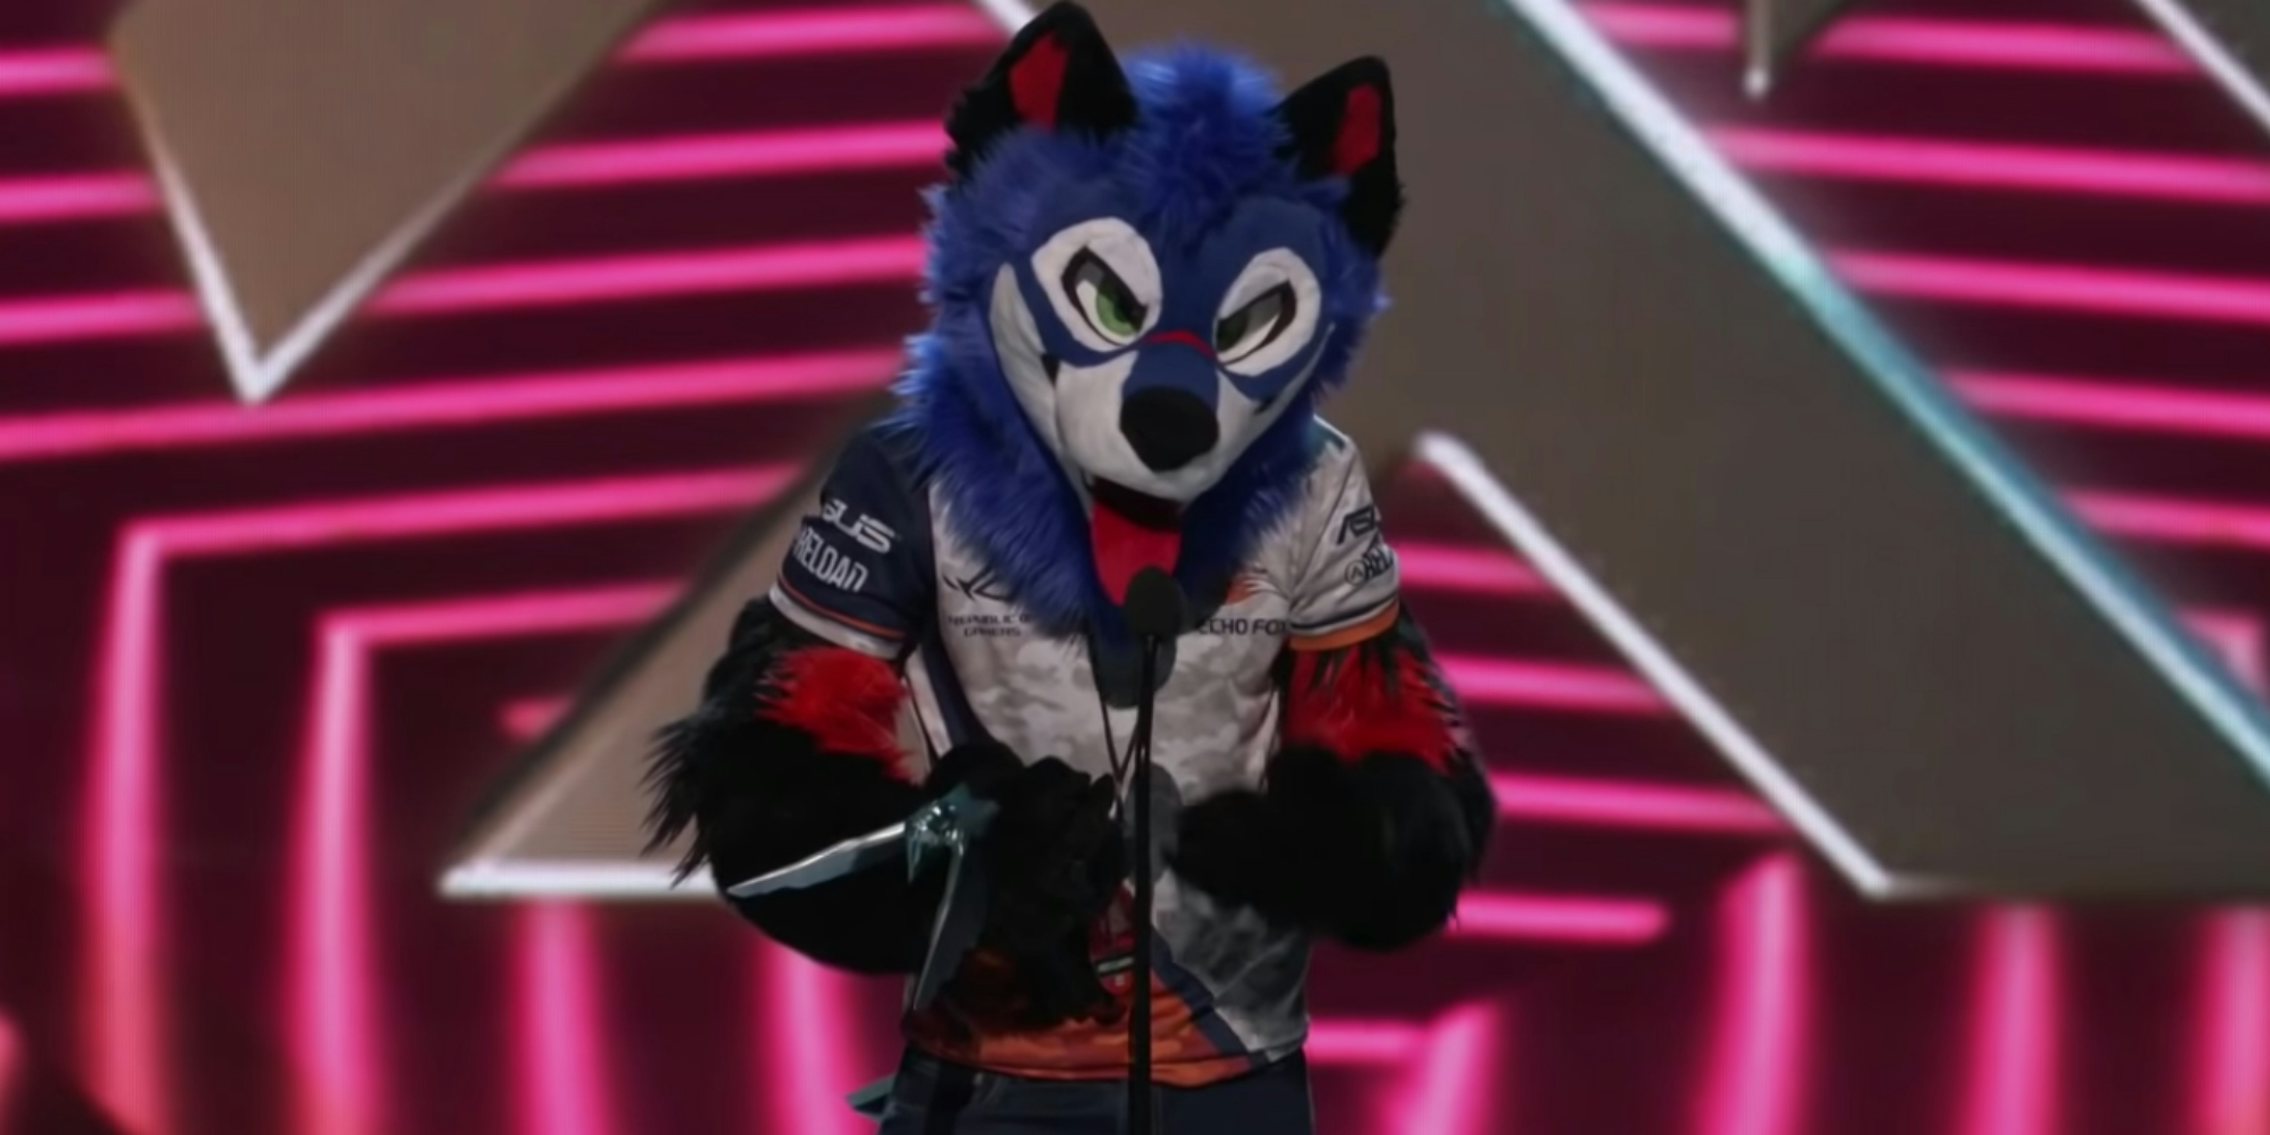 Esports Player of the Year SonicFox is destroying his far-right and alt-right critics.